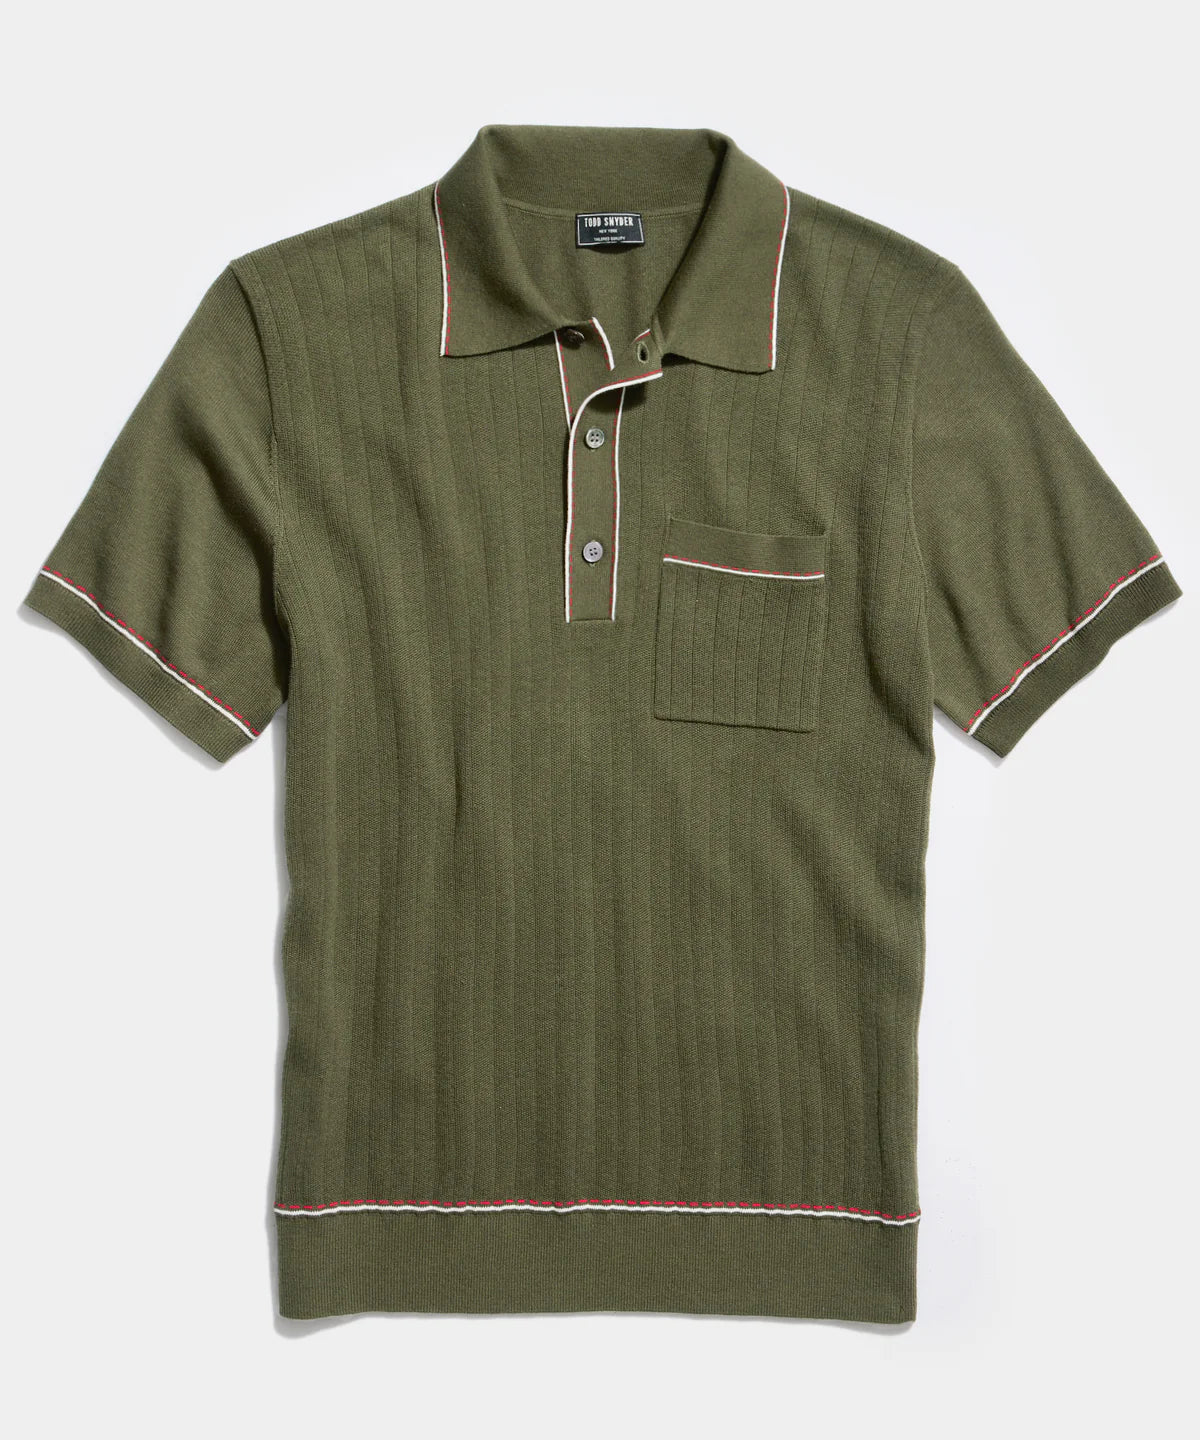 Todd Snyder - TODD SNYDER ITALIAN COTTON SILK TIPPED RIVIERA SWEATER POLO IN OAK MOSS - Rent With Thred